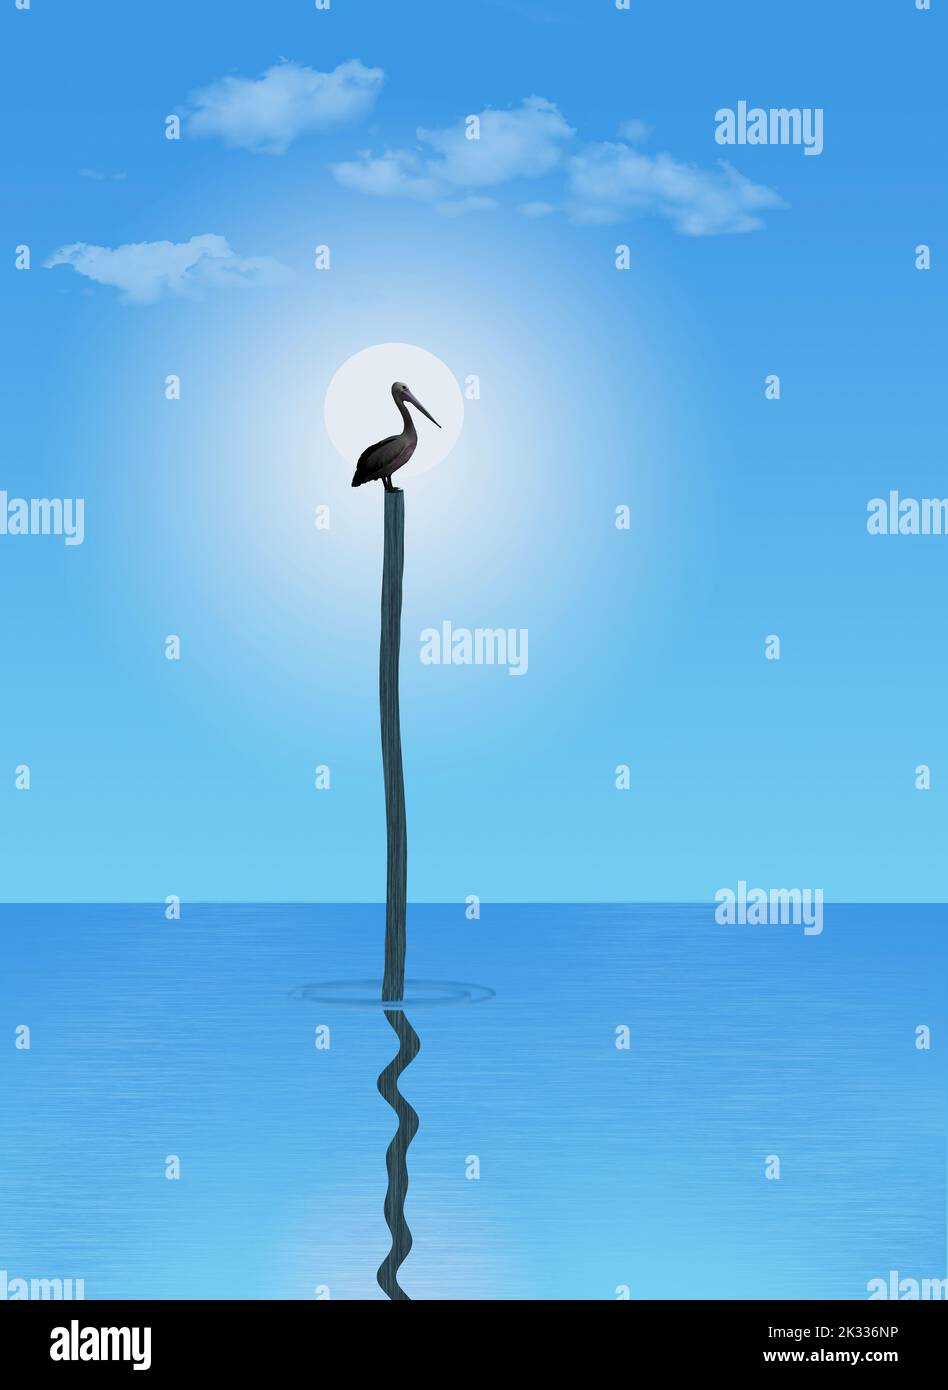 A lone brown pelican rests and perches on top of a tall wooden piling sticking up from the ocean surface with a bright sun behind in this 3-d illustra Stock Photo